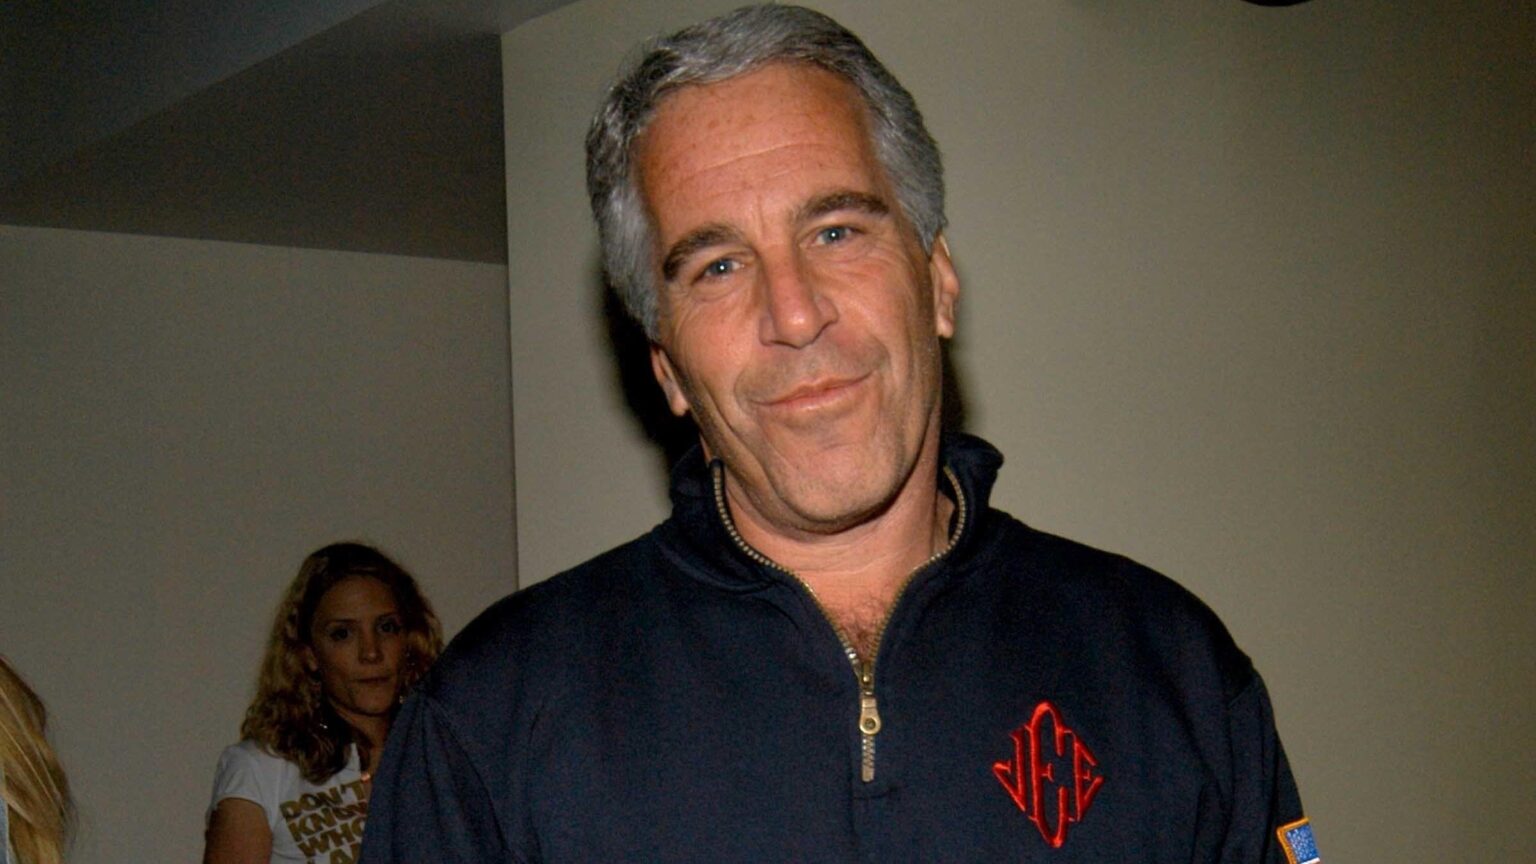 We’re left wondering what might happen with Epstein’s money. Here's what we know about Jeffrey Epstein and his net worth.